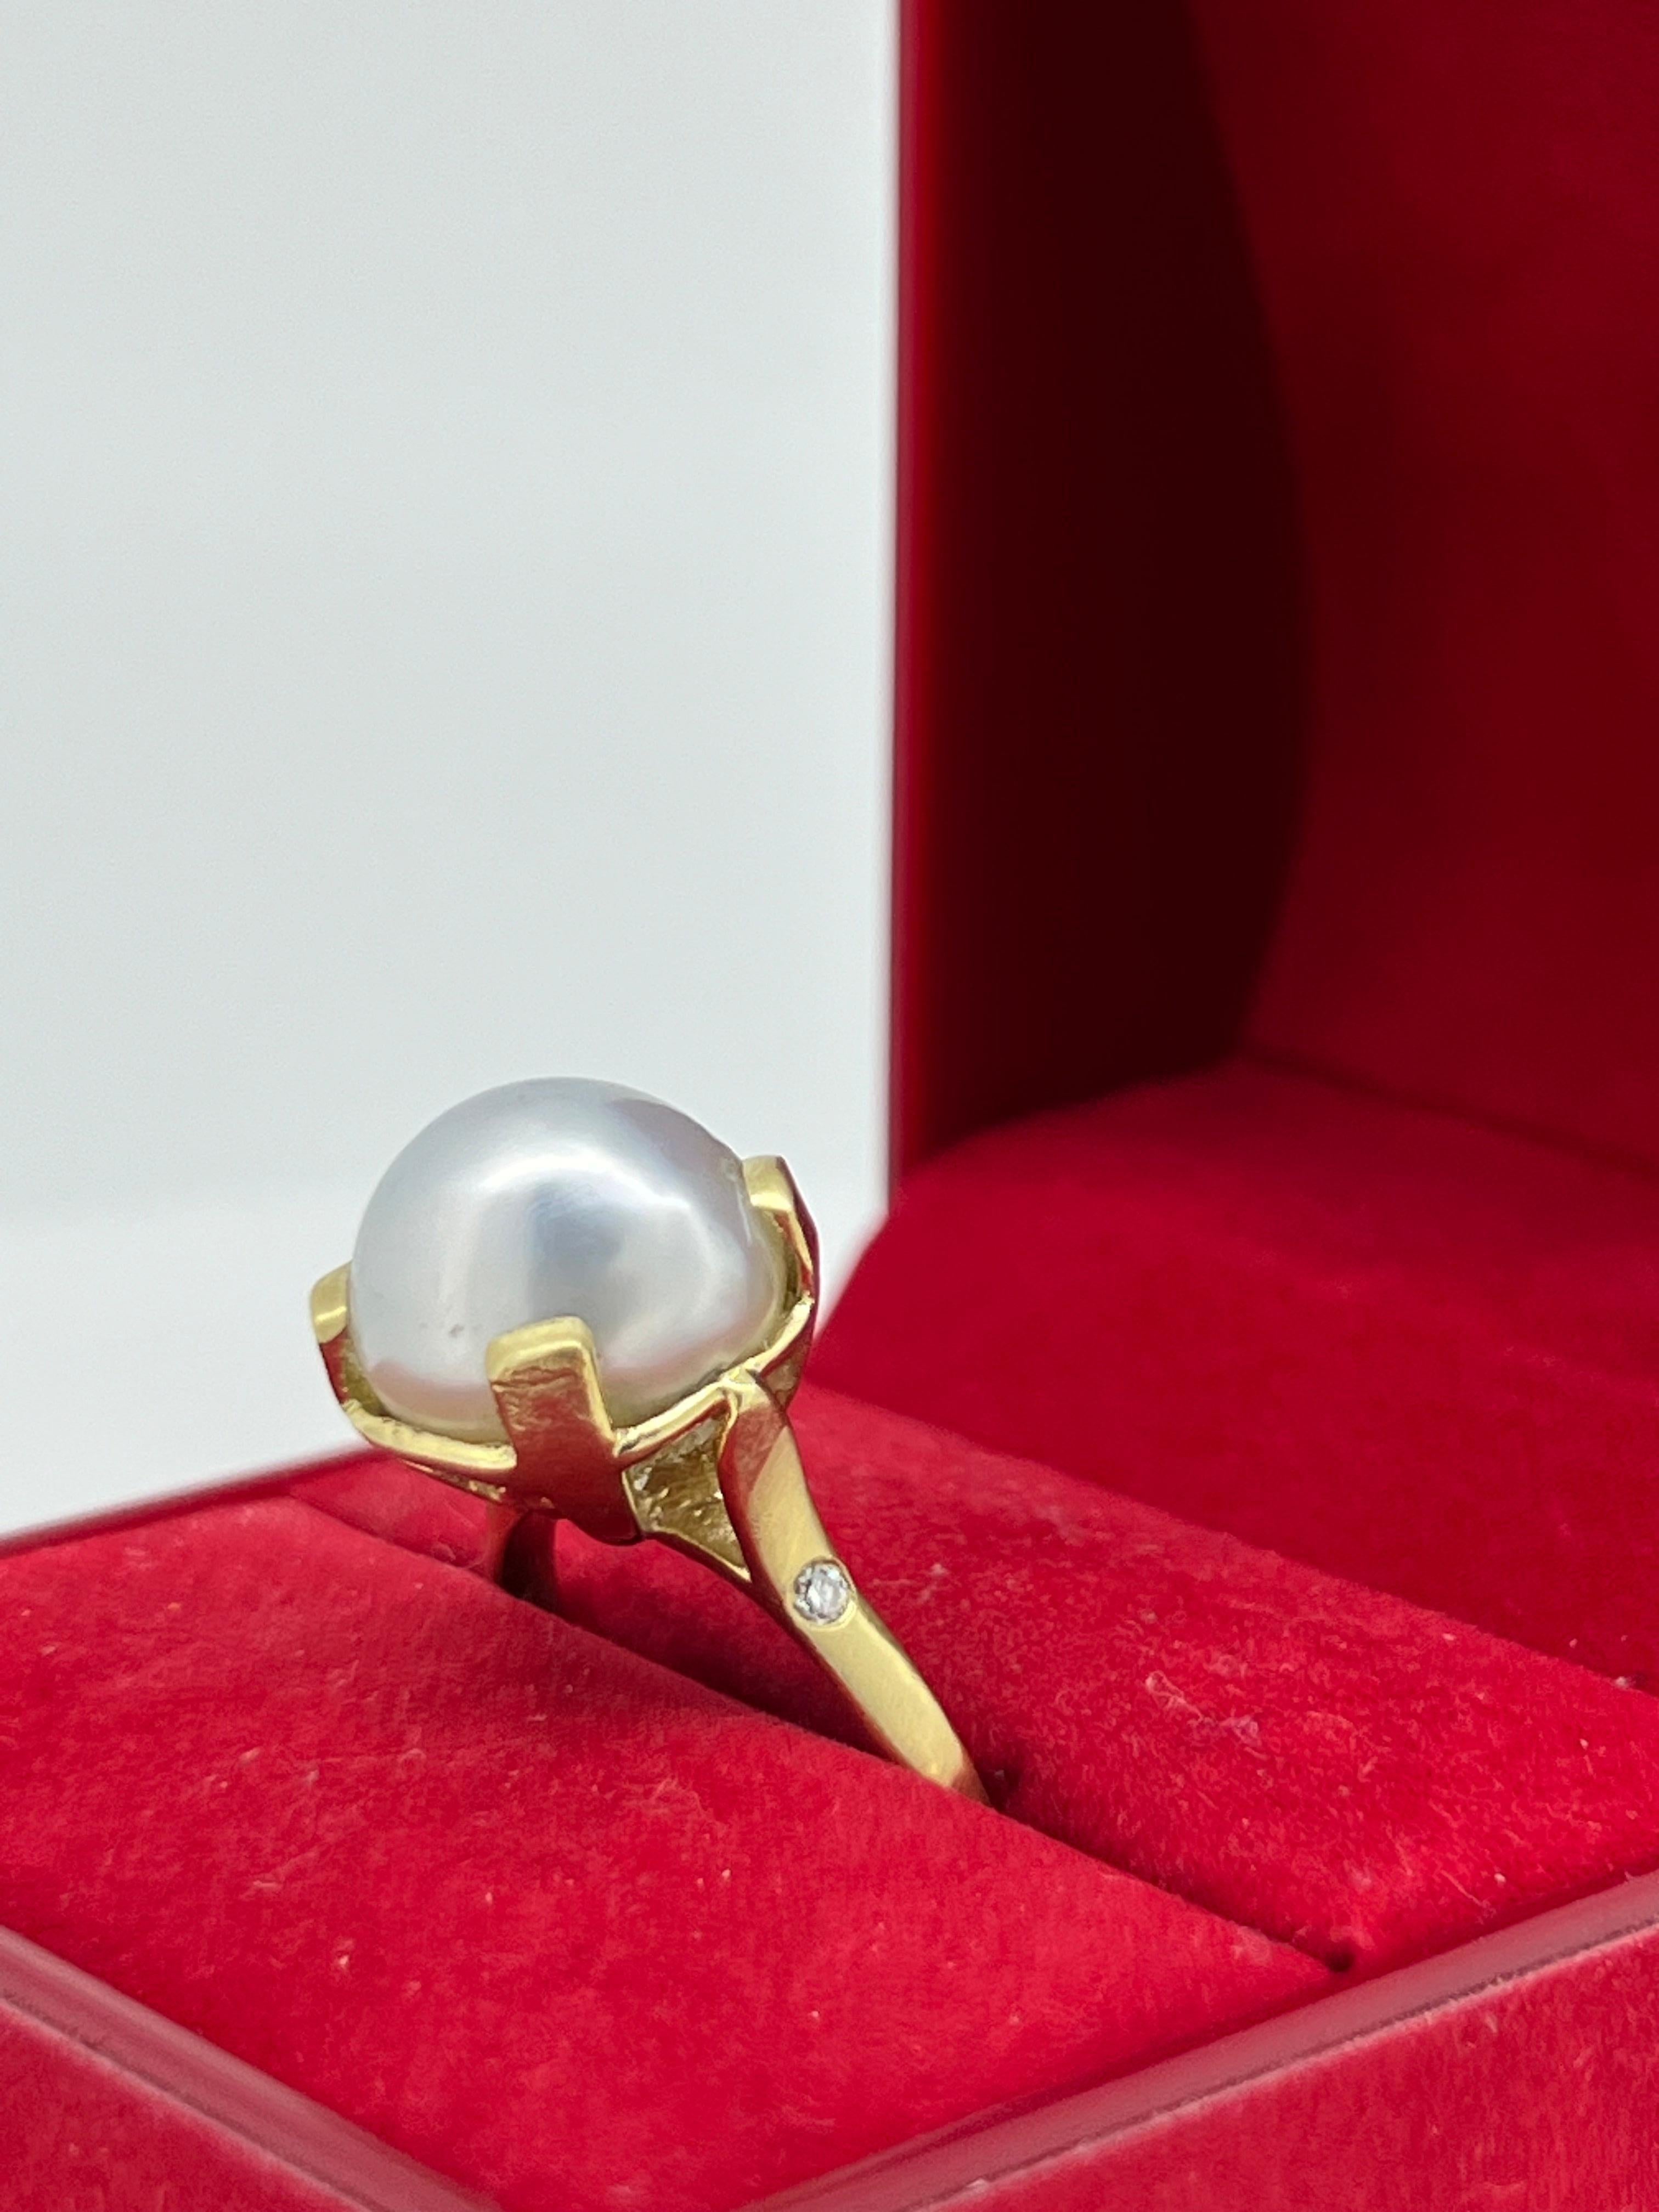 Meticulously crafted in 18K White Gold, 
this vintage ring is centrally 4 claw-set with a 
Round Pearl of impressive 14mm 
of fine cream ivory colour & mirror-like luster,

within 18K Yellow Gold setting & 
diamond set shoulders 

Shank is thick &